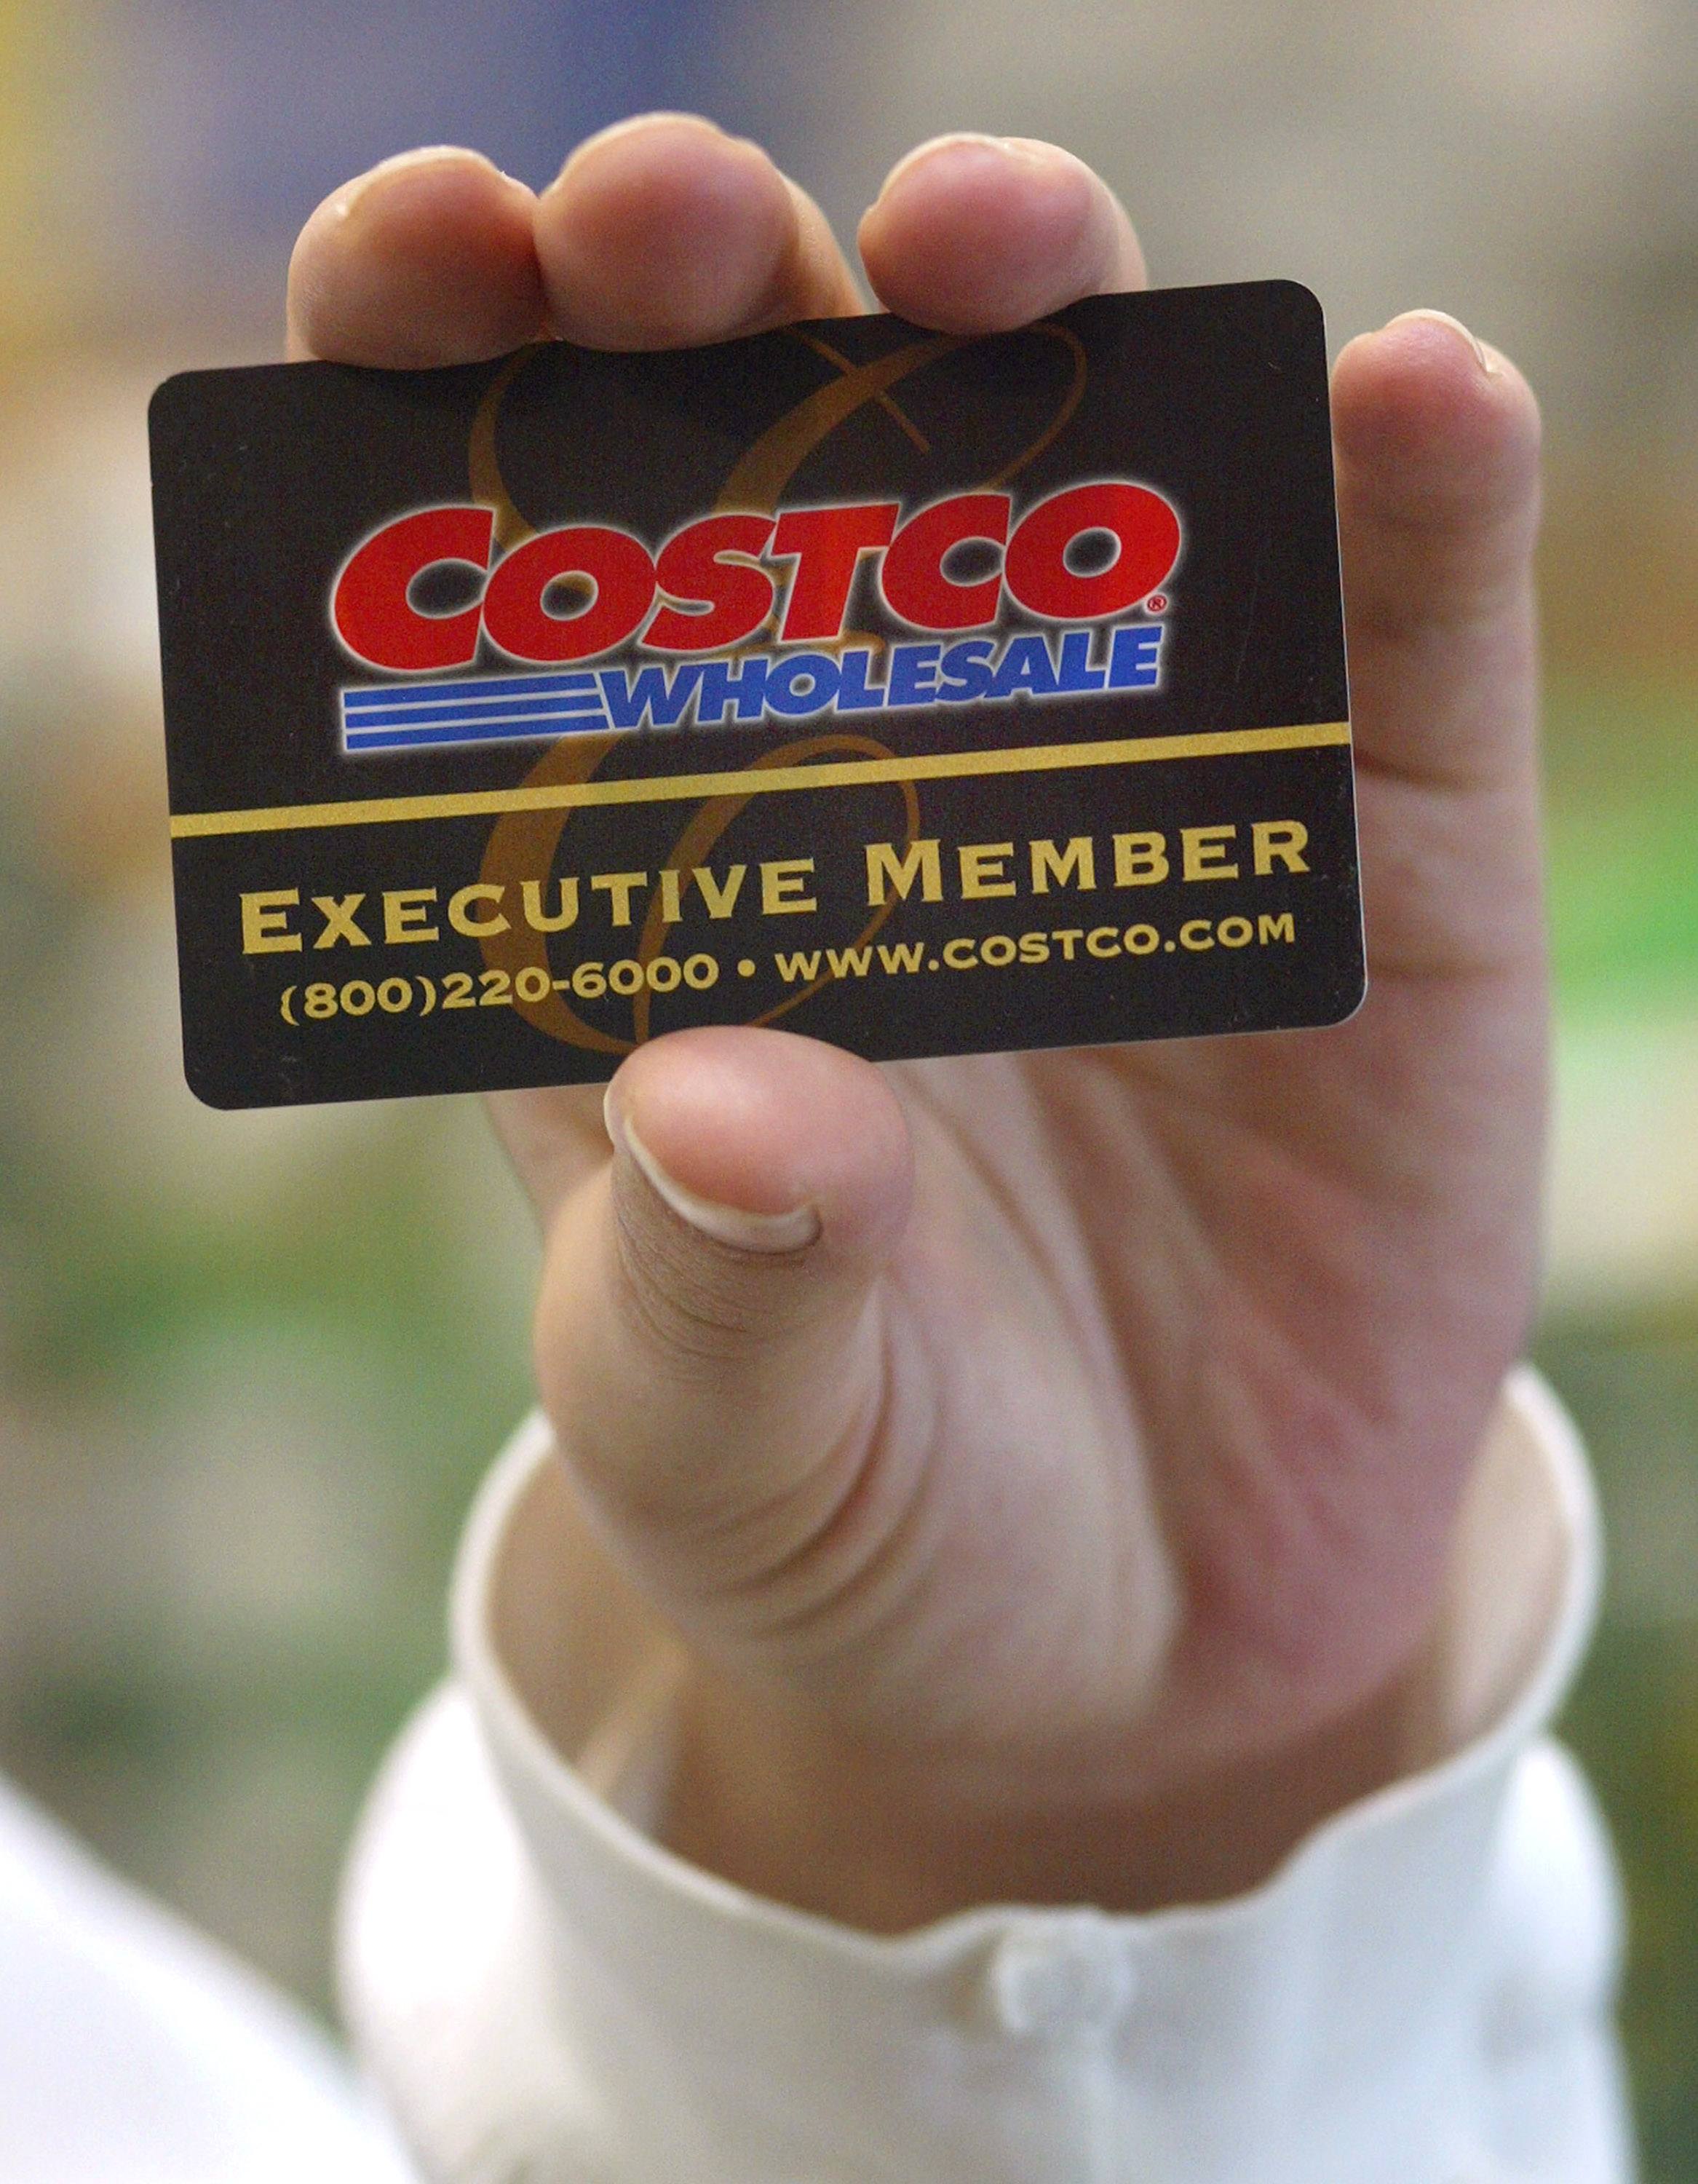 sneaky-little-ways-costco-gets-us-to-spend-more-money-we-fall-for-it